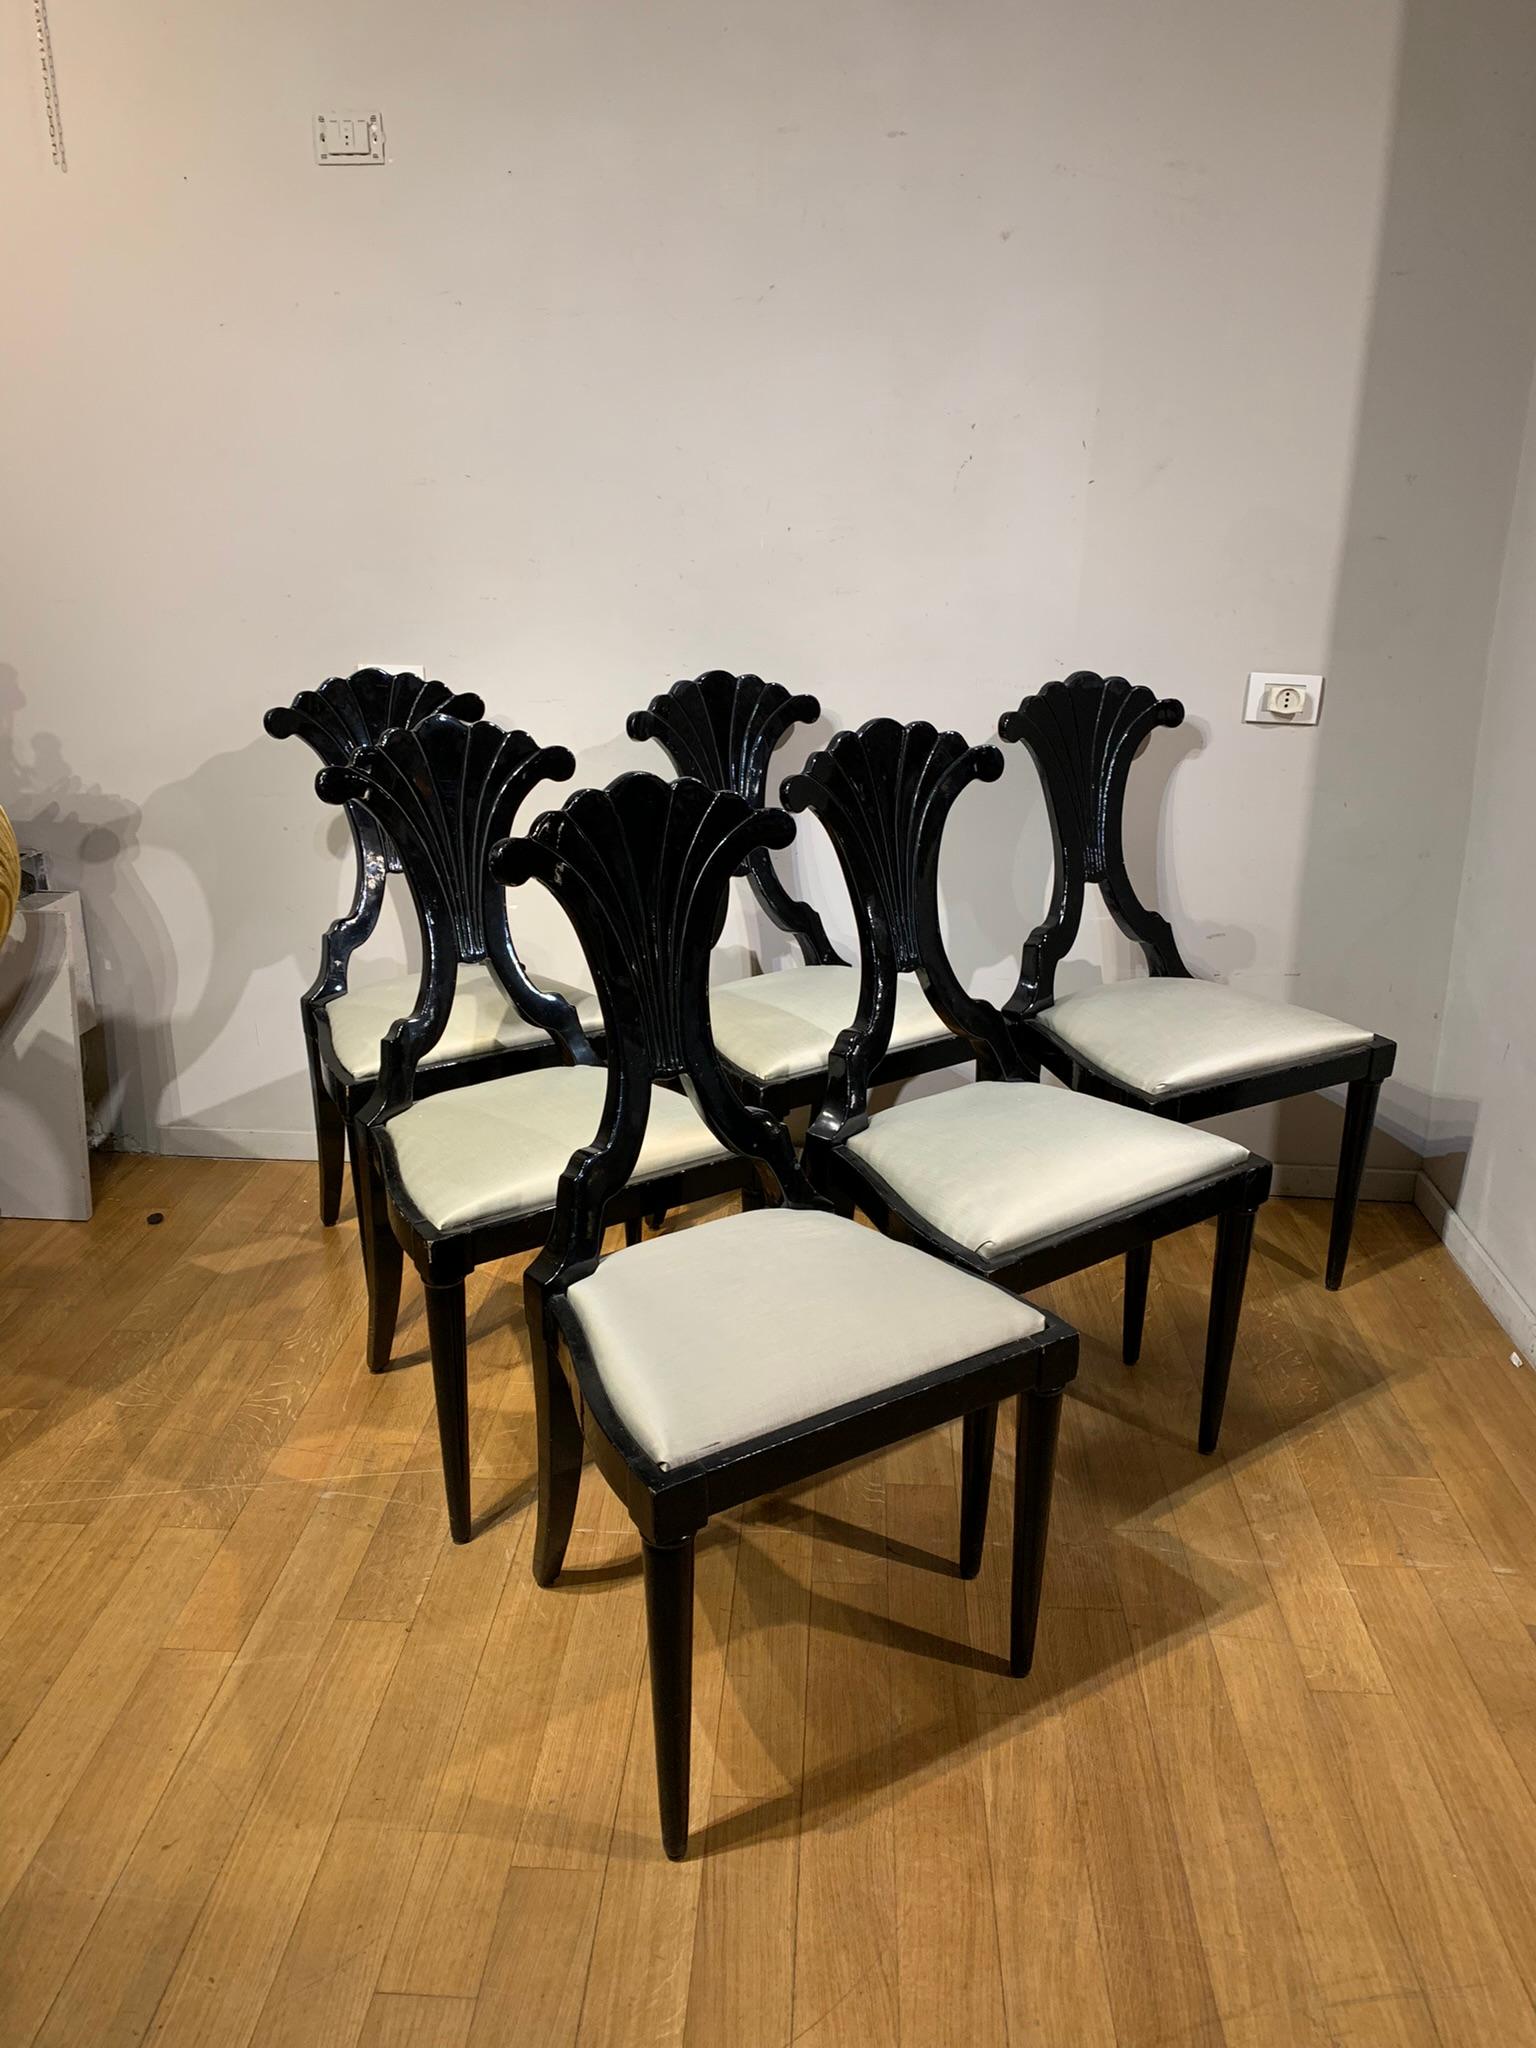 Beautiful and elegant set of six chairs in ebonized wood with a chalky background typical of mid-19th century French manufacture. Truncated conical legs and back in the shape of a stylized cornucopia. Since they are also carved on the back, they are